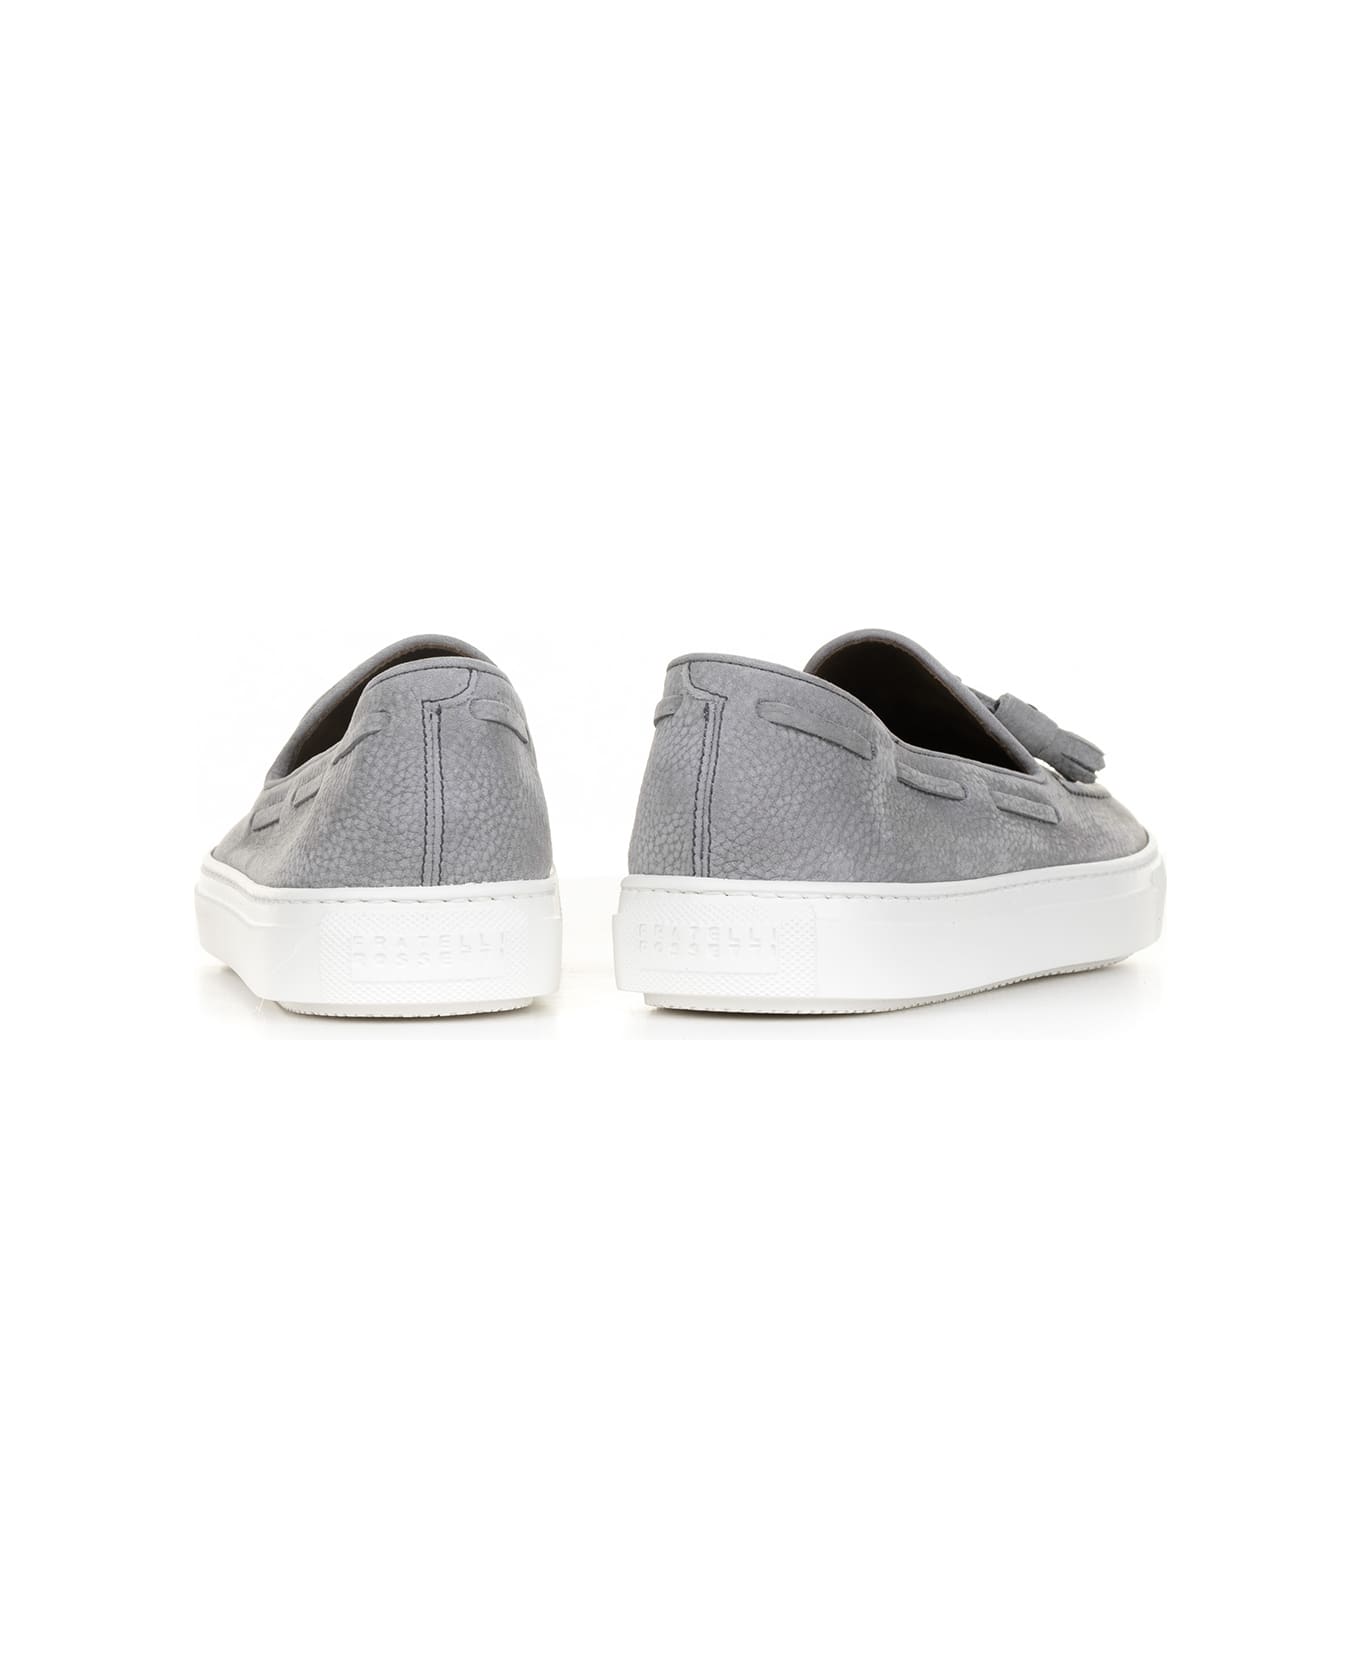 Fratelli Rossetti One Moccasin In Gray Suede And Rubber Sole - GRIGIO ローファー＆デッキシューズ